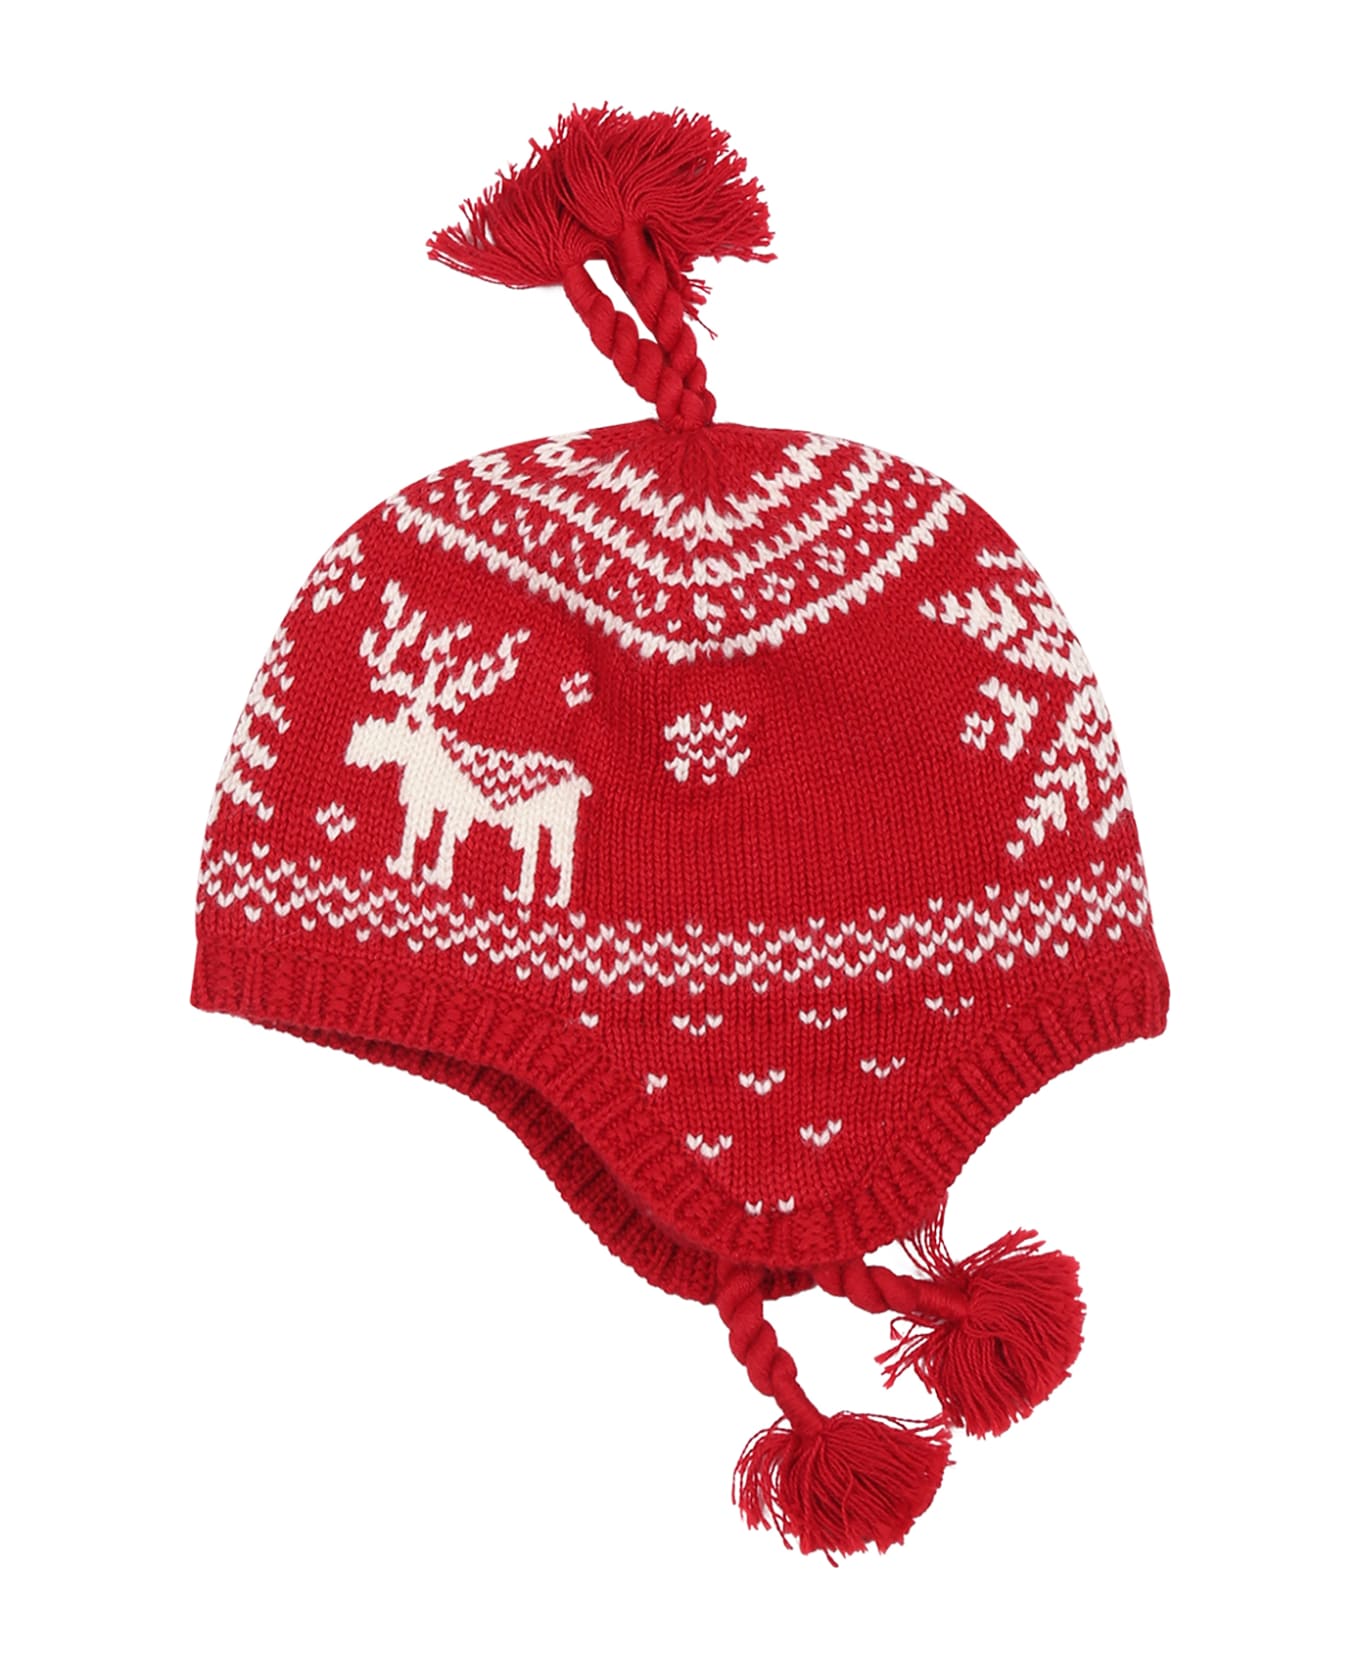 Ralph Lauren Red Hat For Baby Girl With Jacquard Pattern - Red